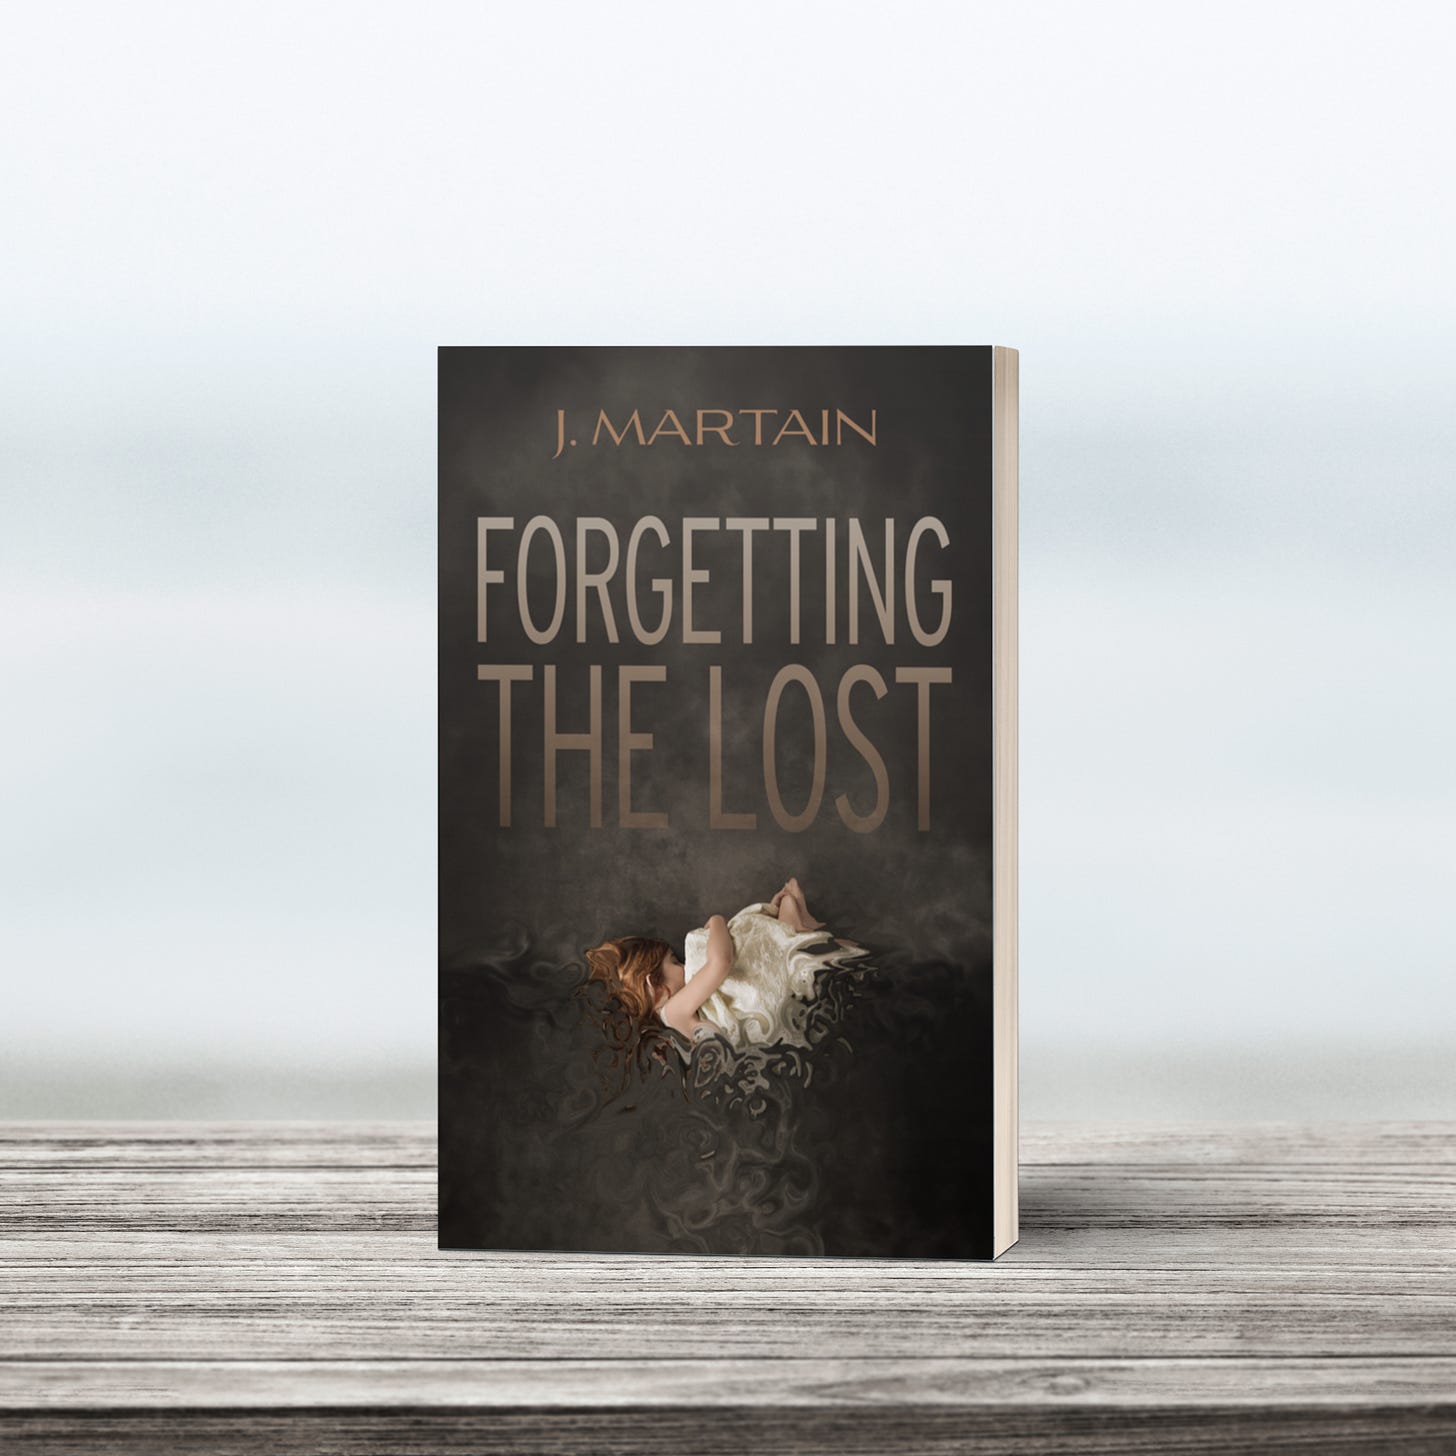 Forgetting the Lost by J. Martain paperback on moody coastal background